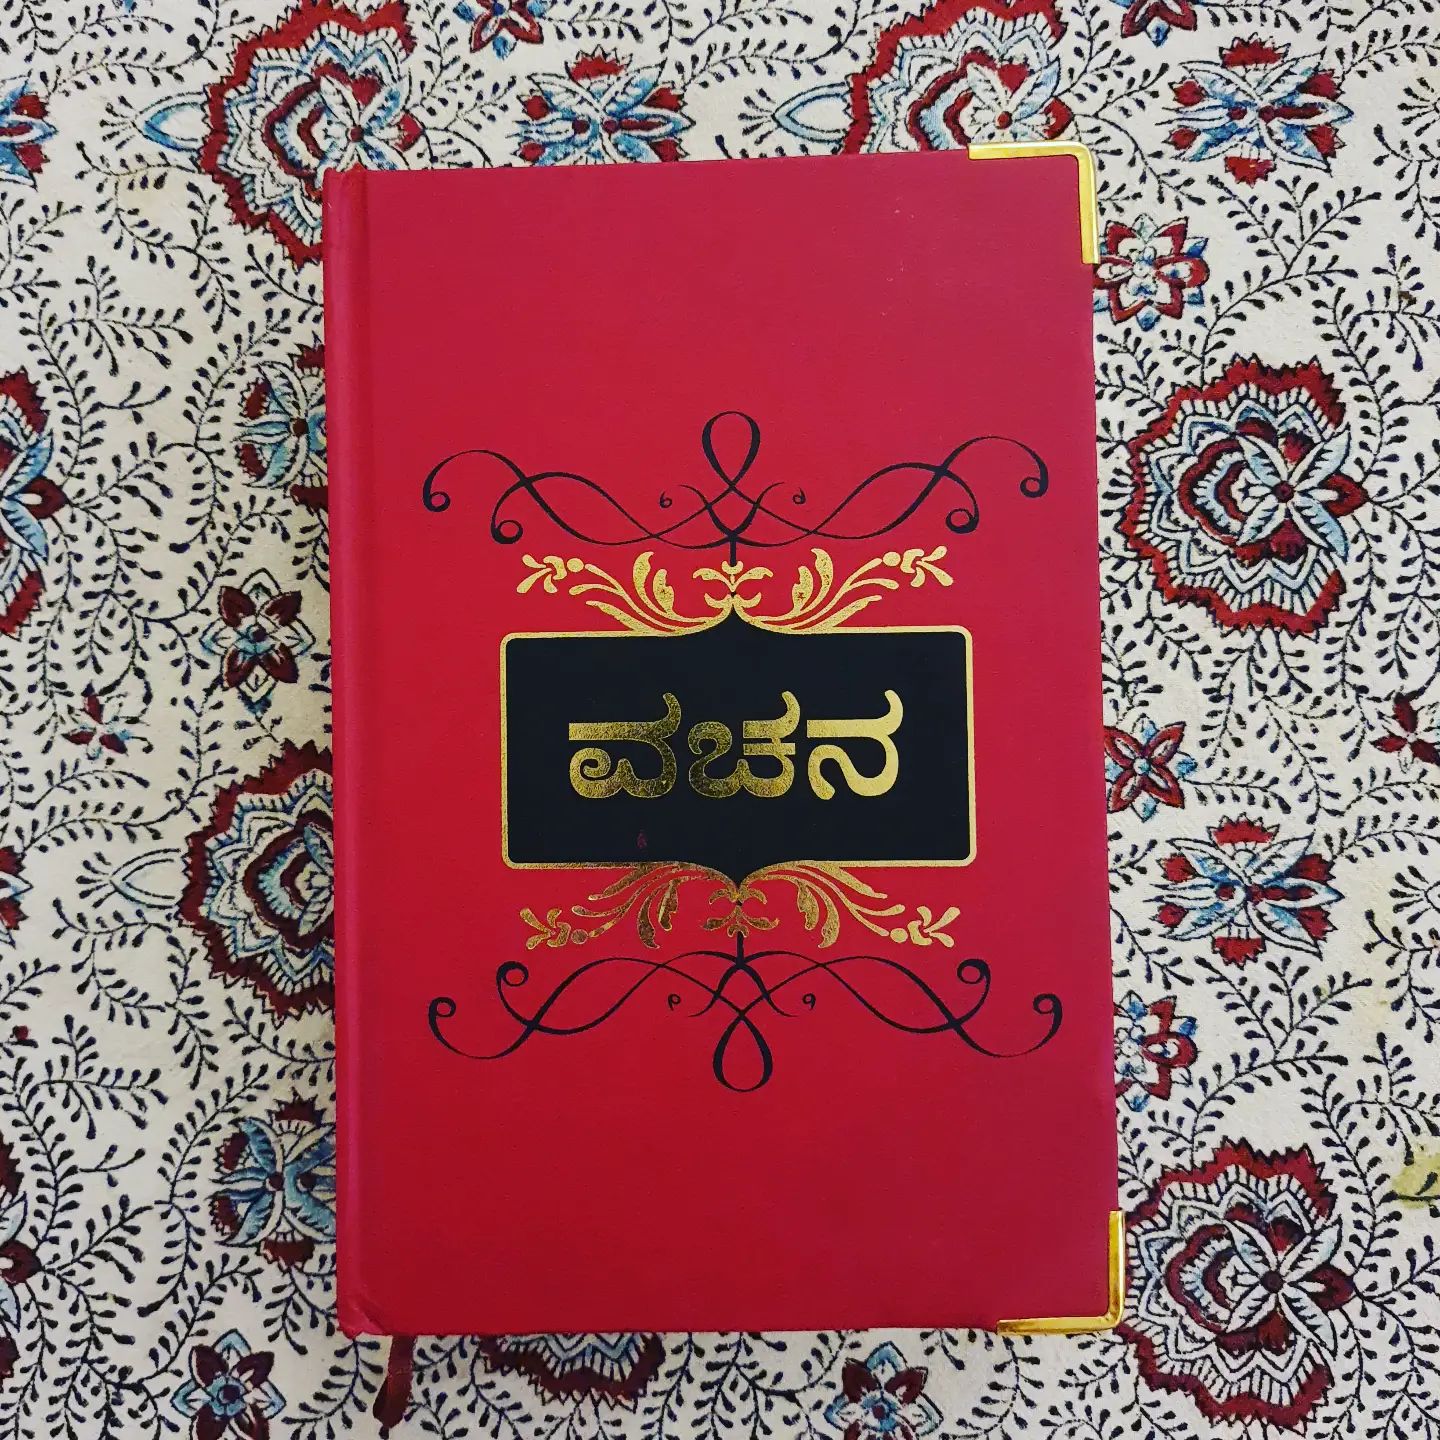 Vachana (Kannada): A Collection of Shivasharanas' VachanasEdited by Dr. M M Kalburgi. There is no better way to spend ₹350. Hard bound. Also a great gift.